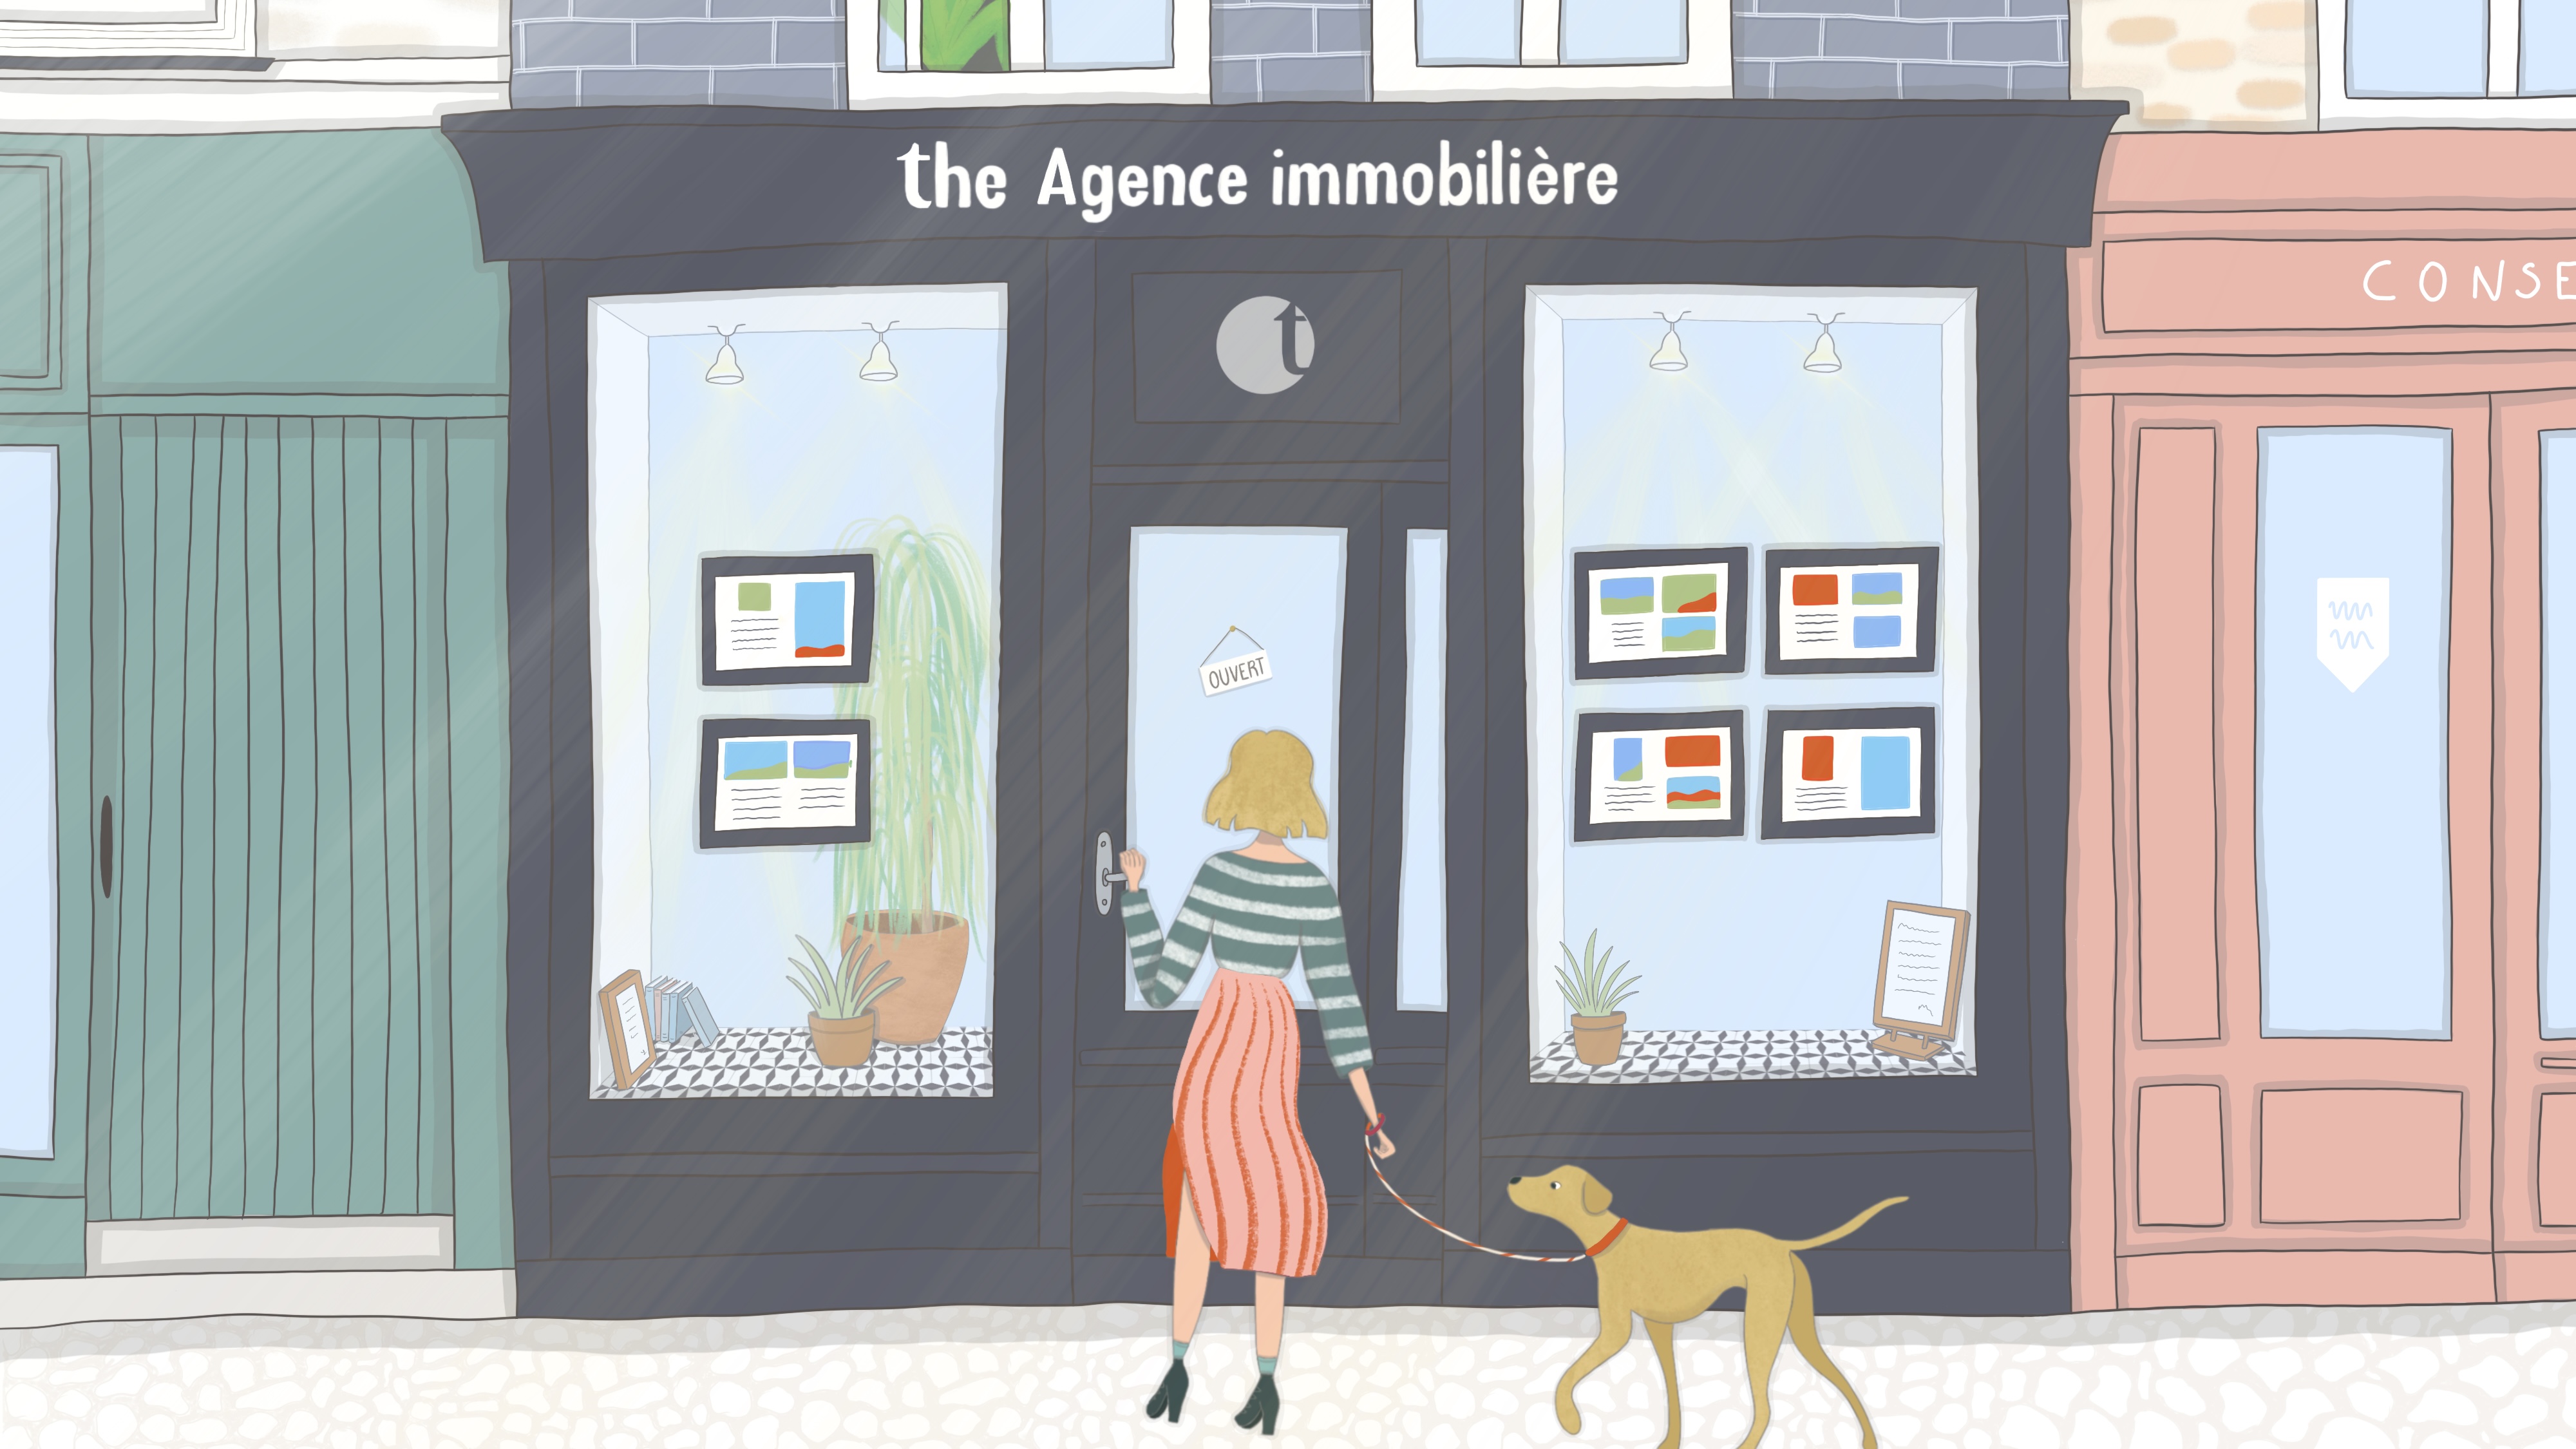 Logo THE AGENCE IMMOBILIERE PARIS